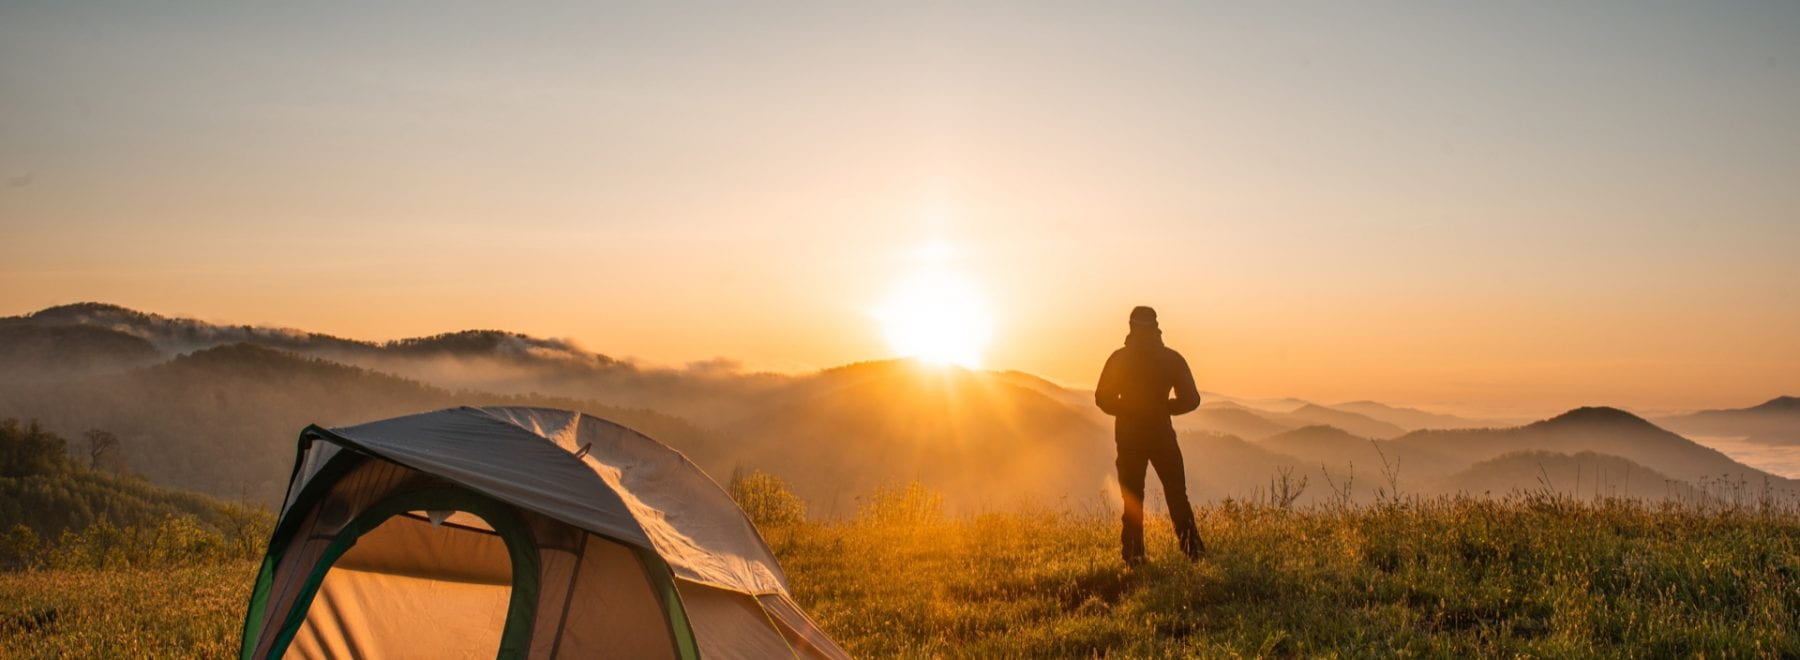 Tent pitched with a man stood watching the sunset